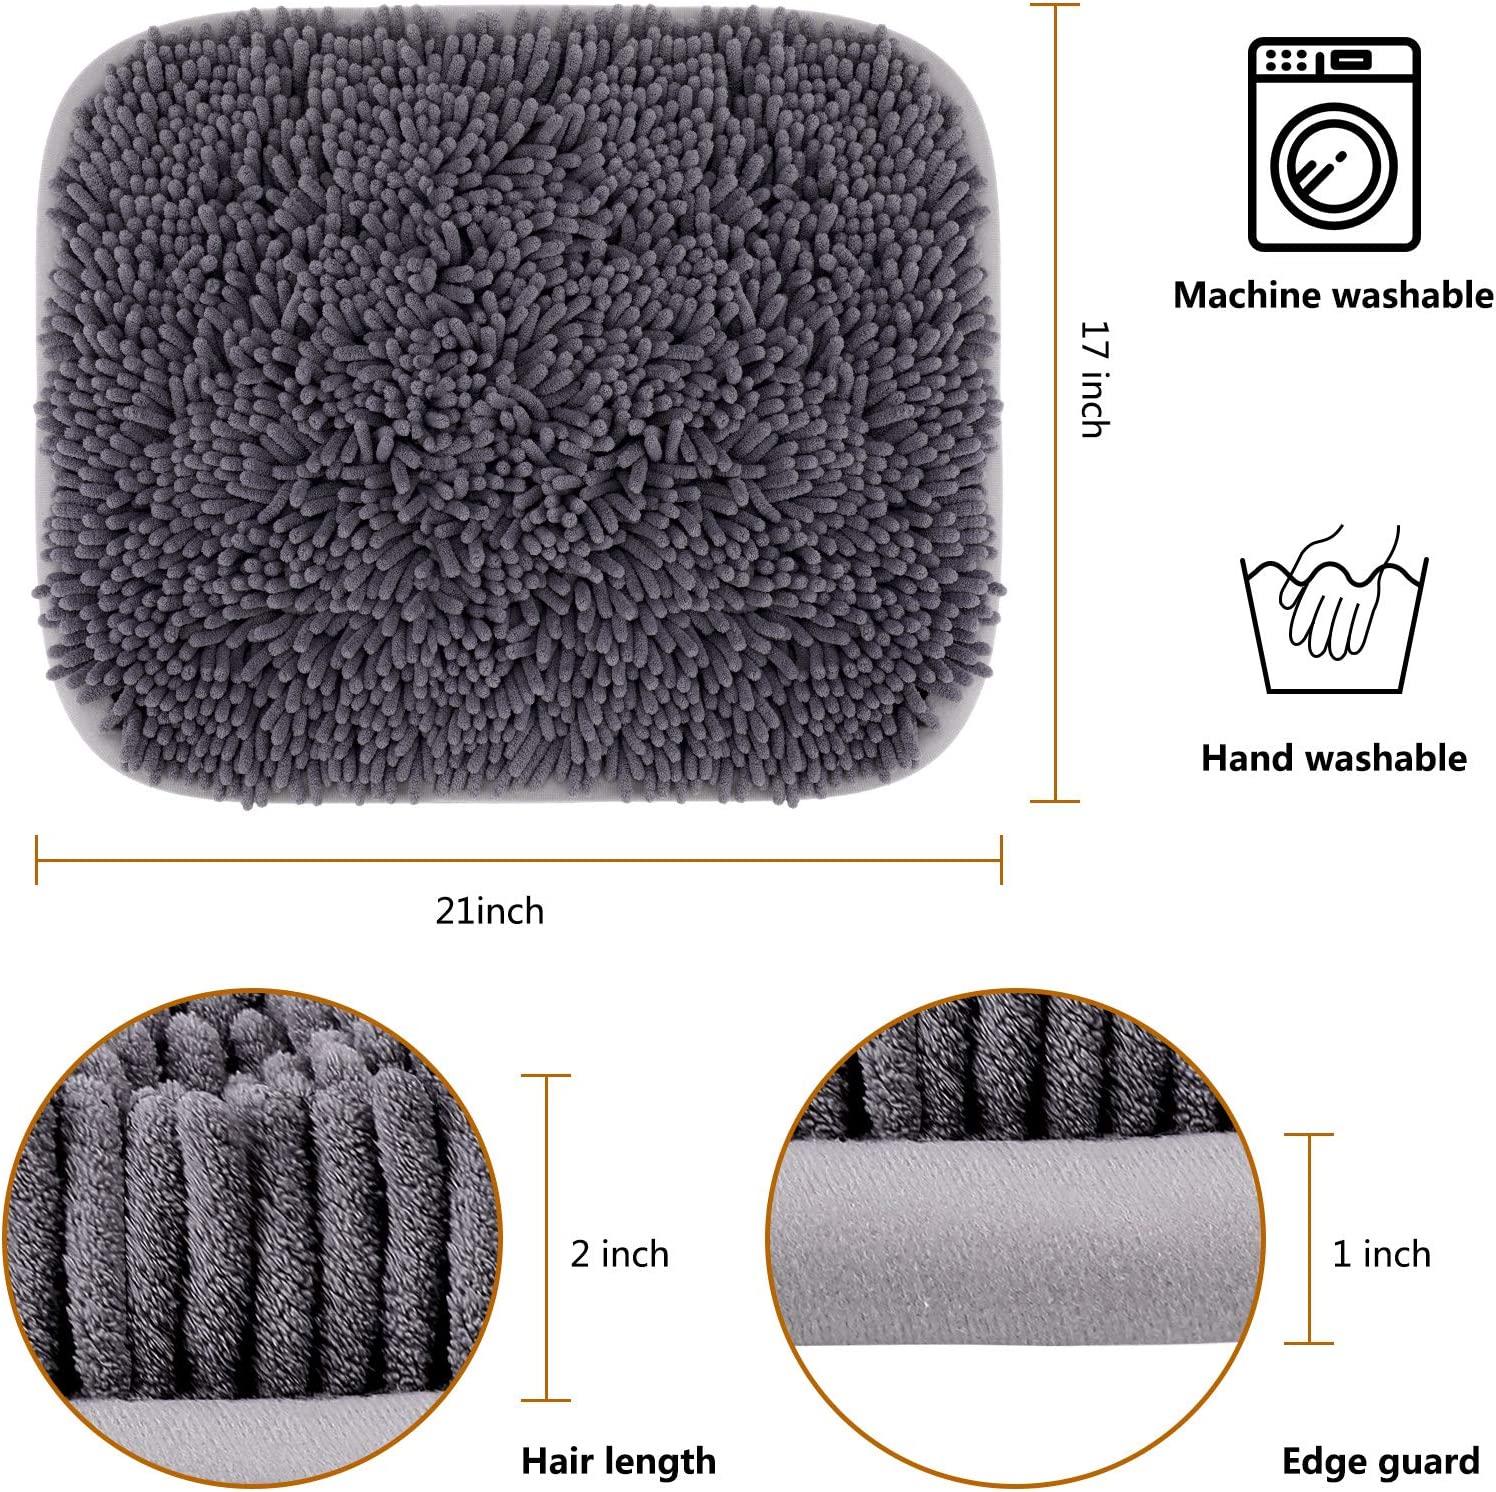 Runda Snuffle Mat for Dogs, 17'' x 21'' Dog Snuffle Mat Interactive Feed Game for Boredom, Encourages Natural Foraging Skills and Stress Relief for